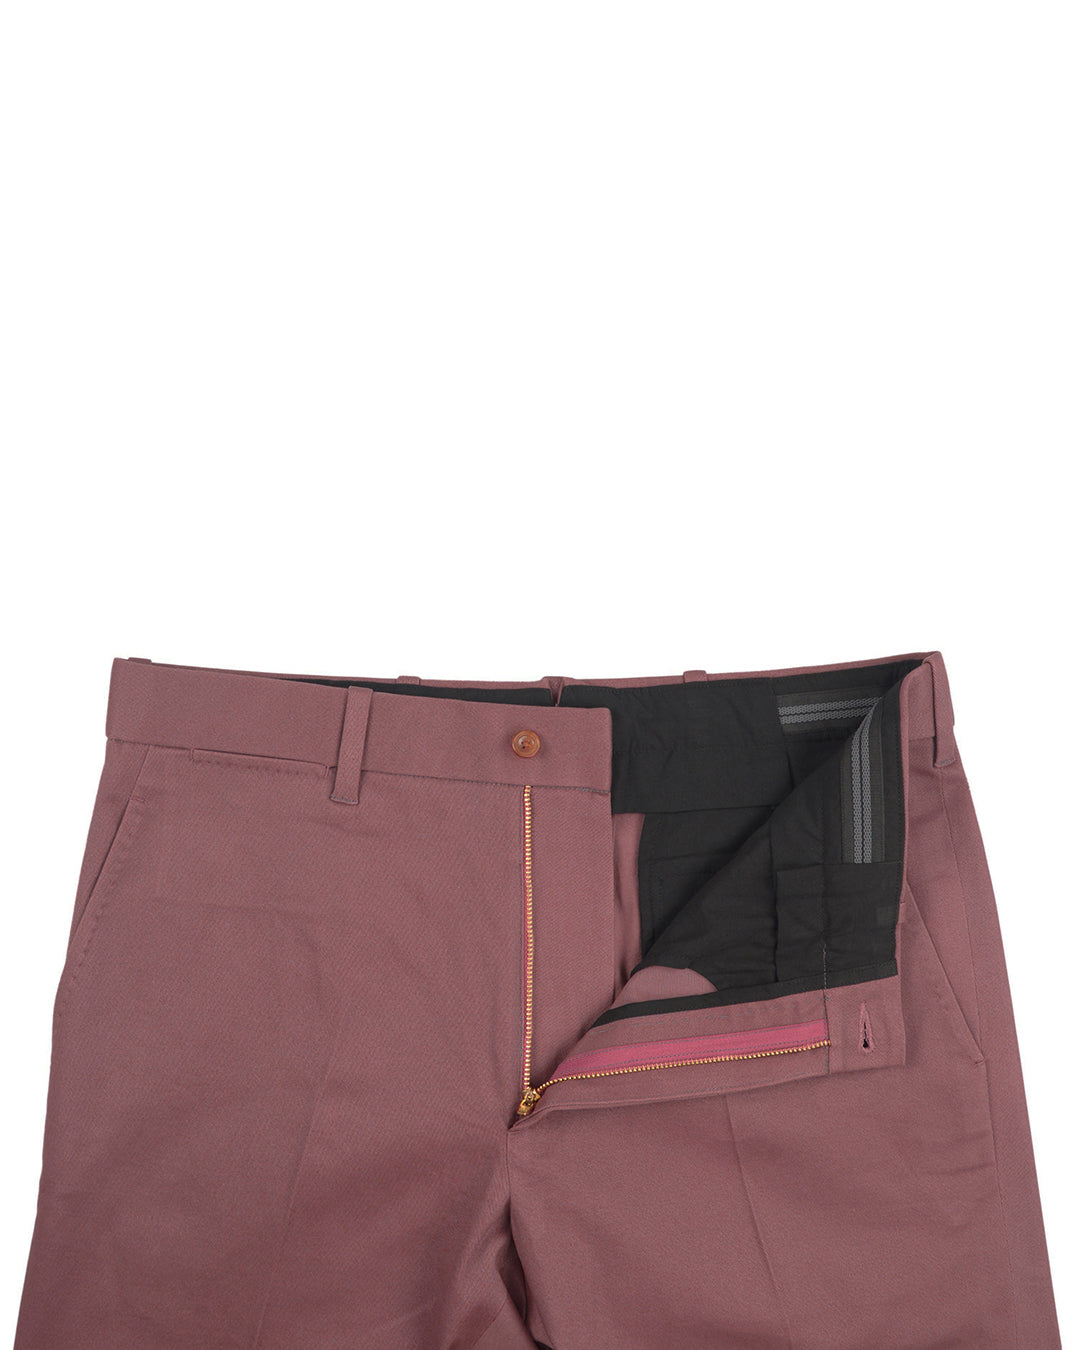 DK Salmon Pink 4-Way Stretchable Soft Chinos